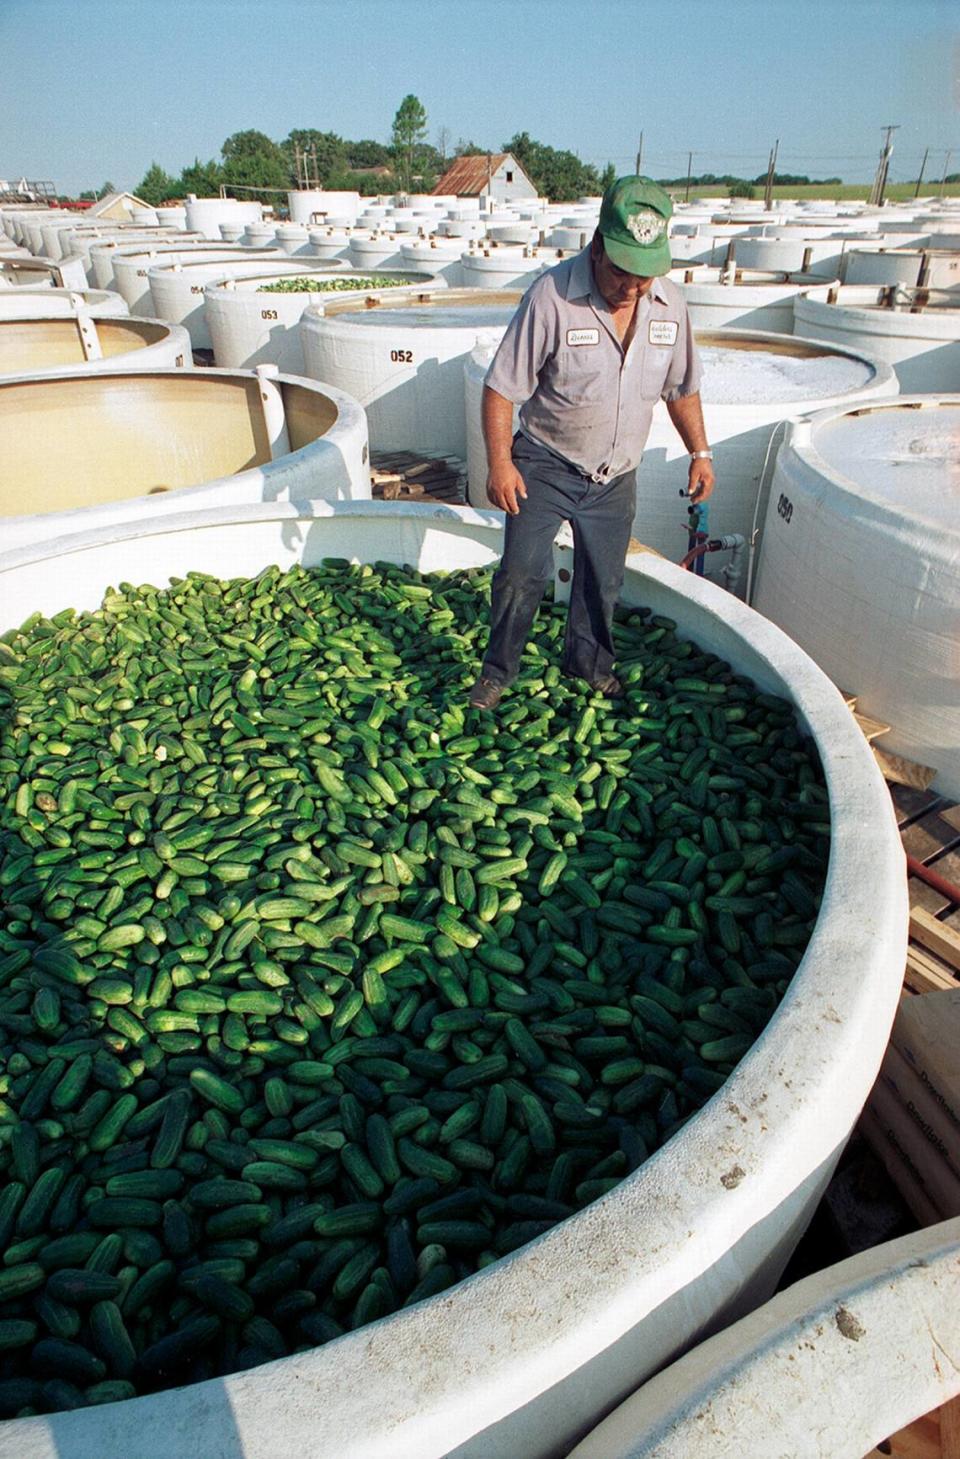 View of pickles processing at the Best Maid factory. A worker is seen standing on top of a large barrel of cucumbers. [FWST photographer Norm Tindell]